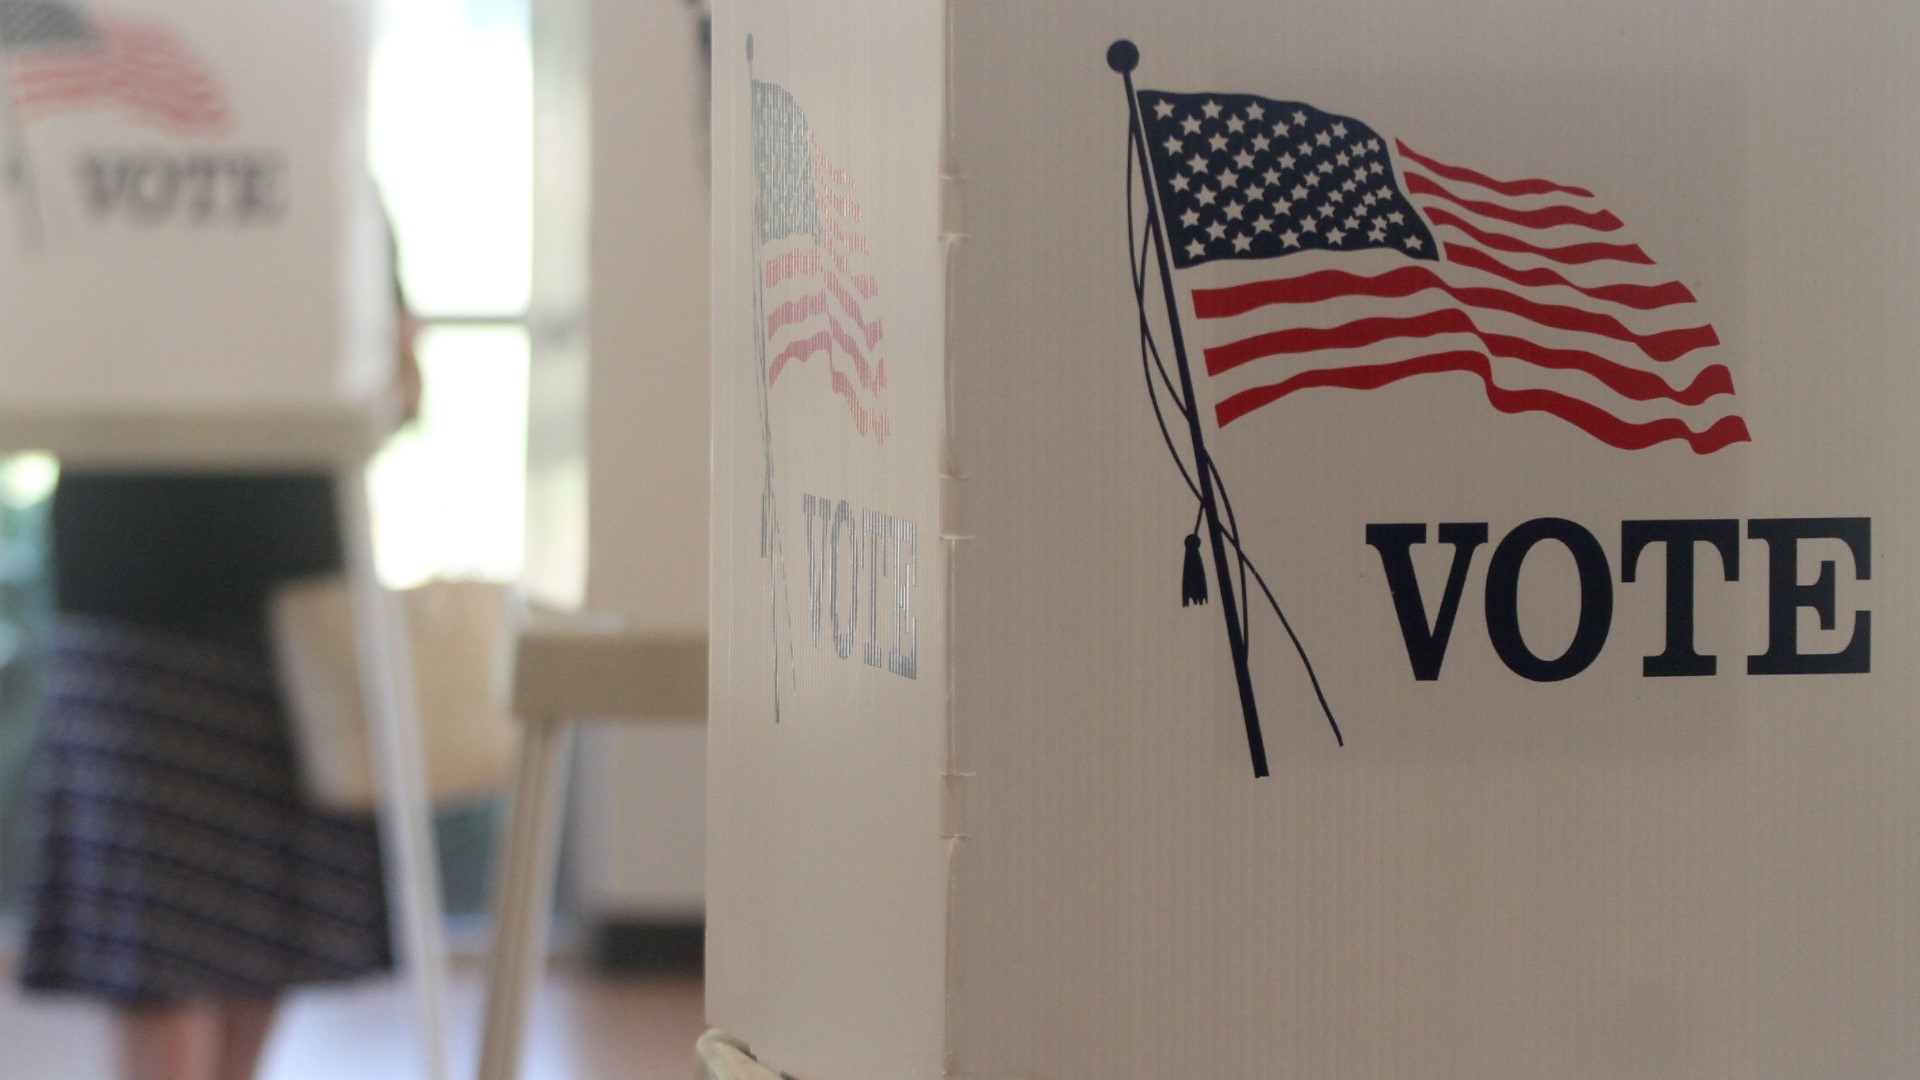 The American College of Physicians released a study exploring how informed patients and health care professionals can make meaningful policy changes on Election Day.